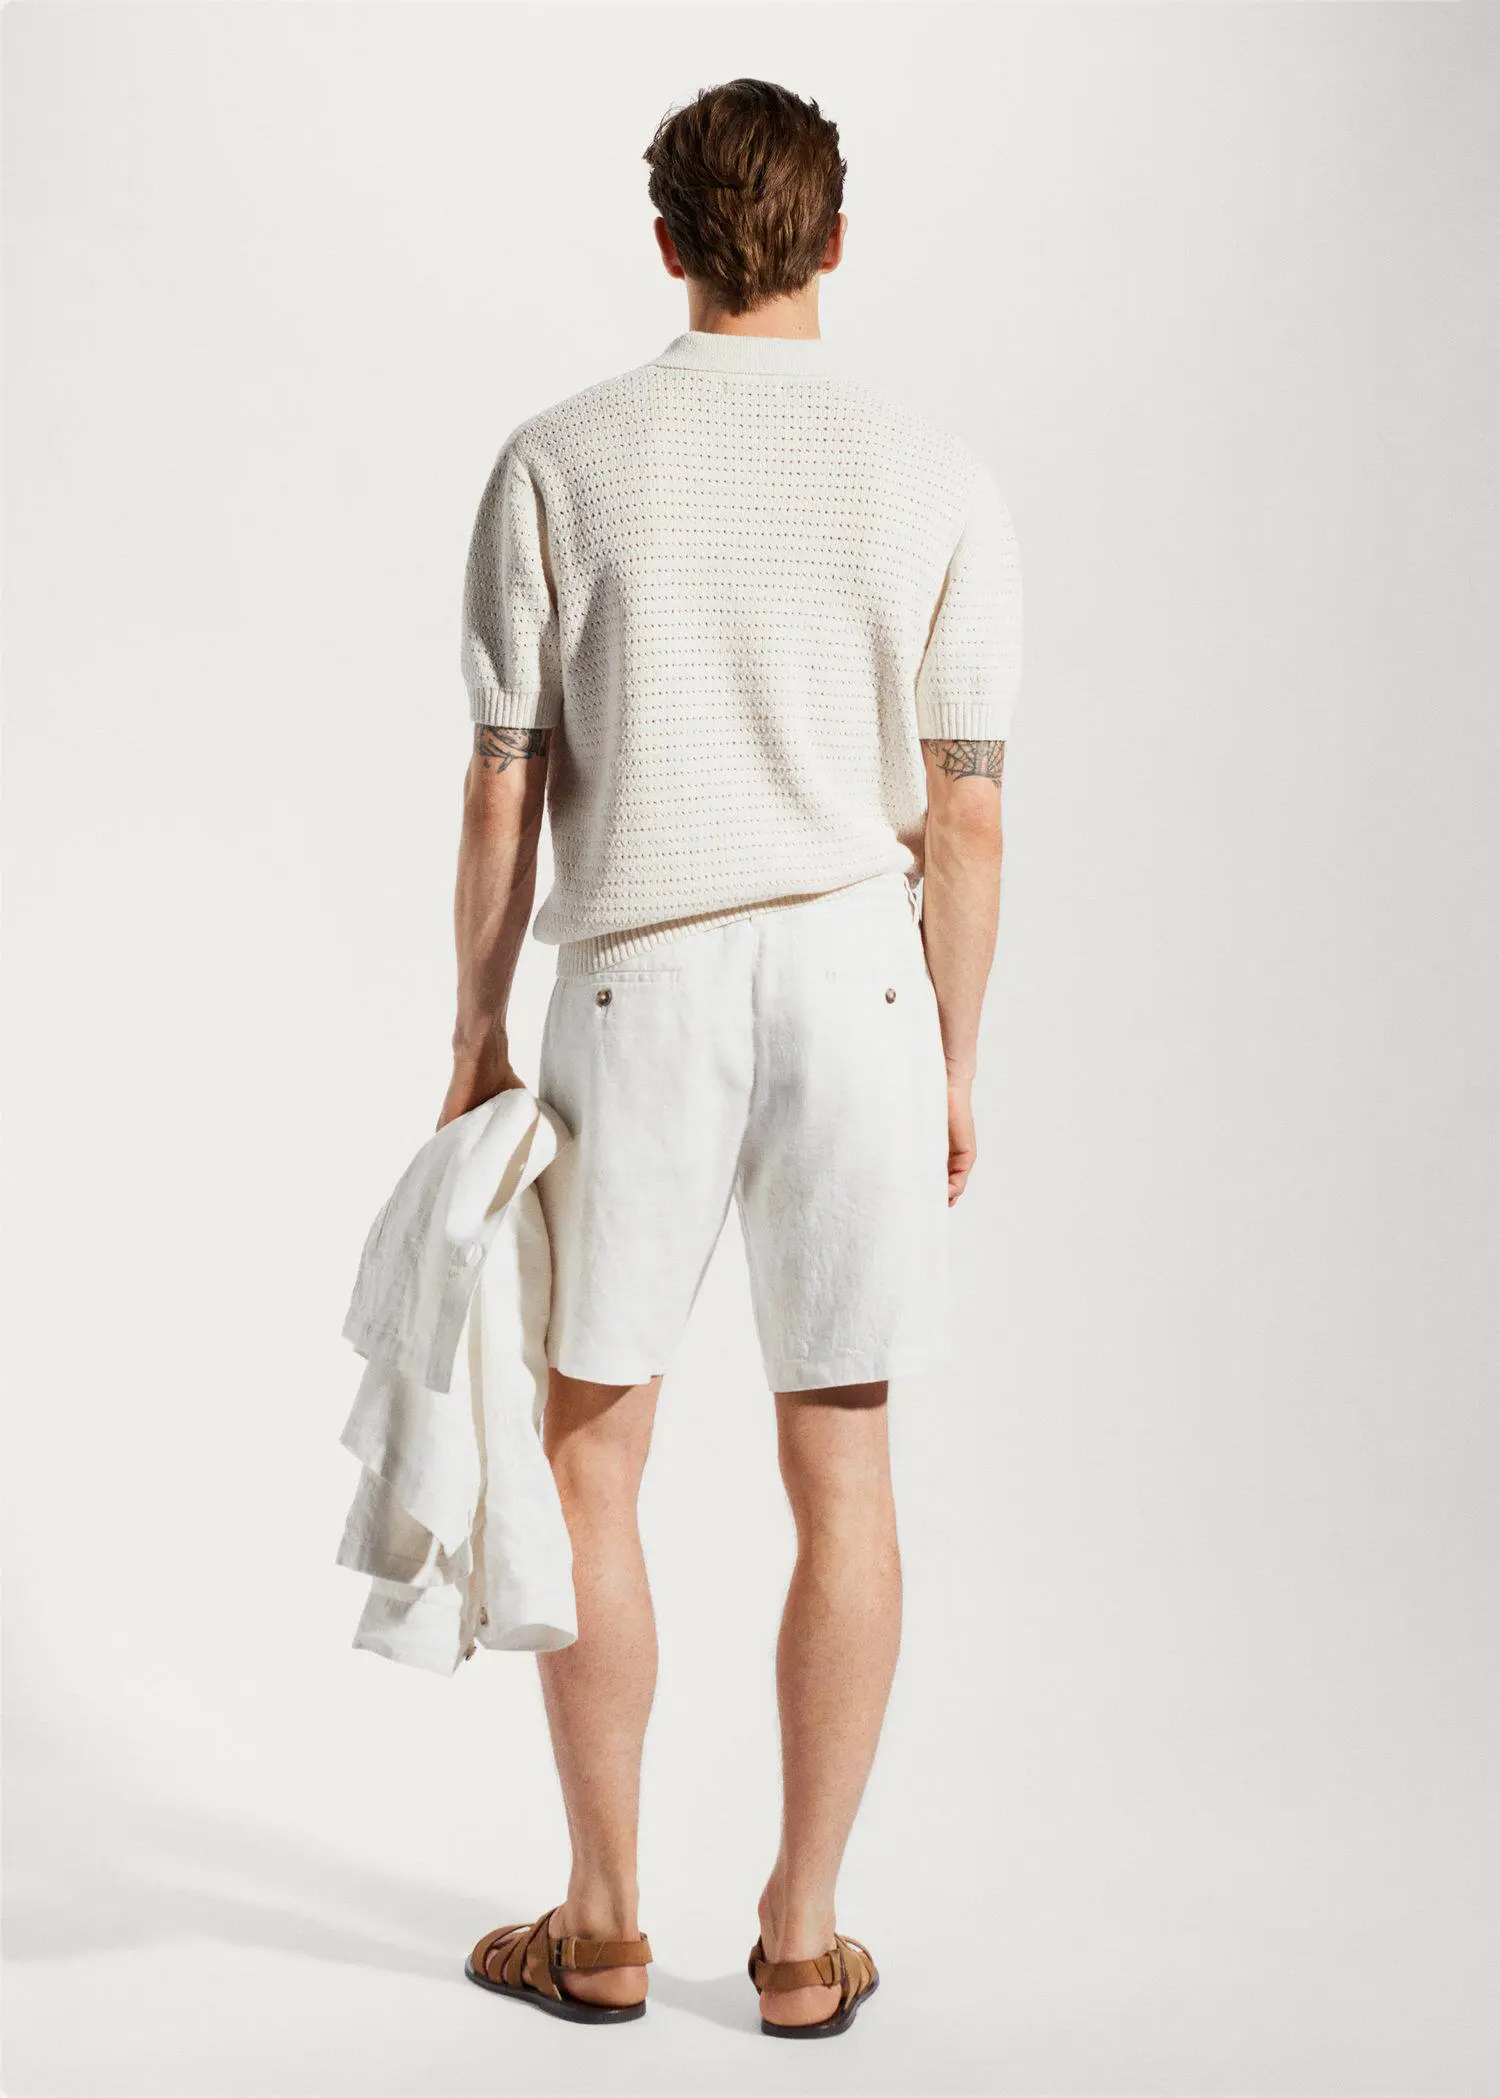 Mango 100% linen bermuda shorts with drawstring. a man in white shorts and a white sweater. 